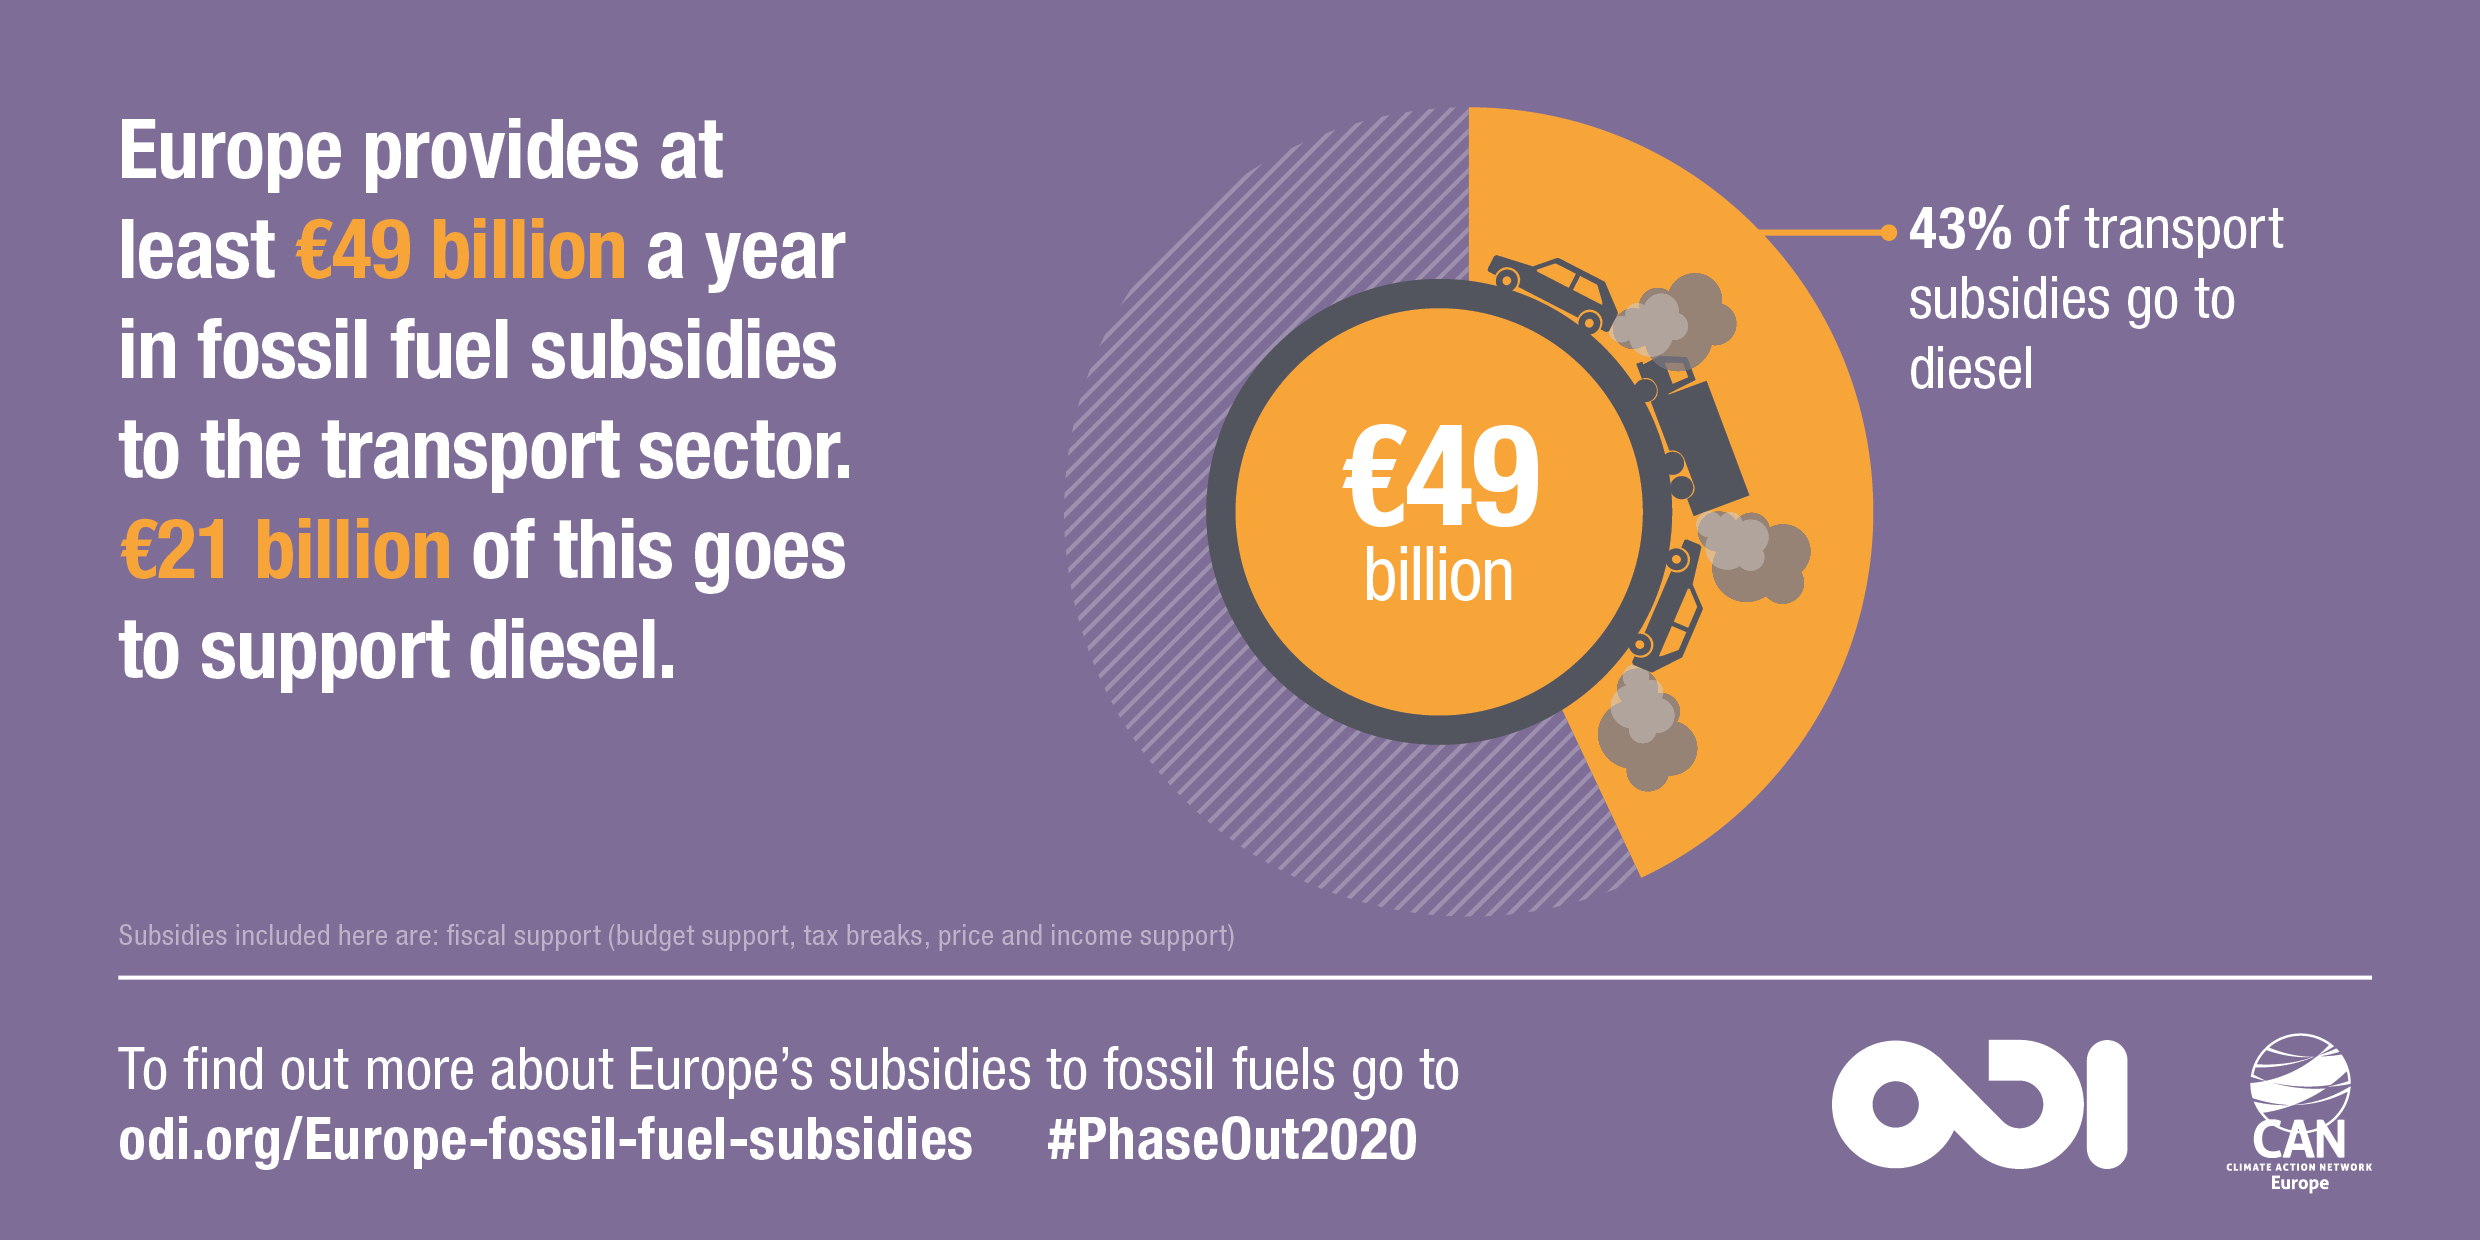 Europe provides at least €49 billion a year in fossil fuel subsidies to the transport sector. €21 billion of this goes to support diesel. Image: Overseas Development Institute